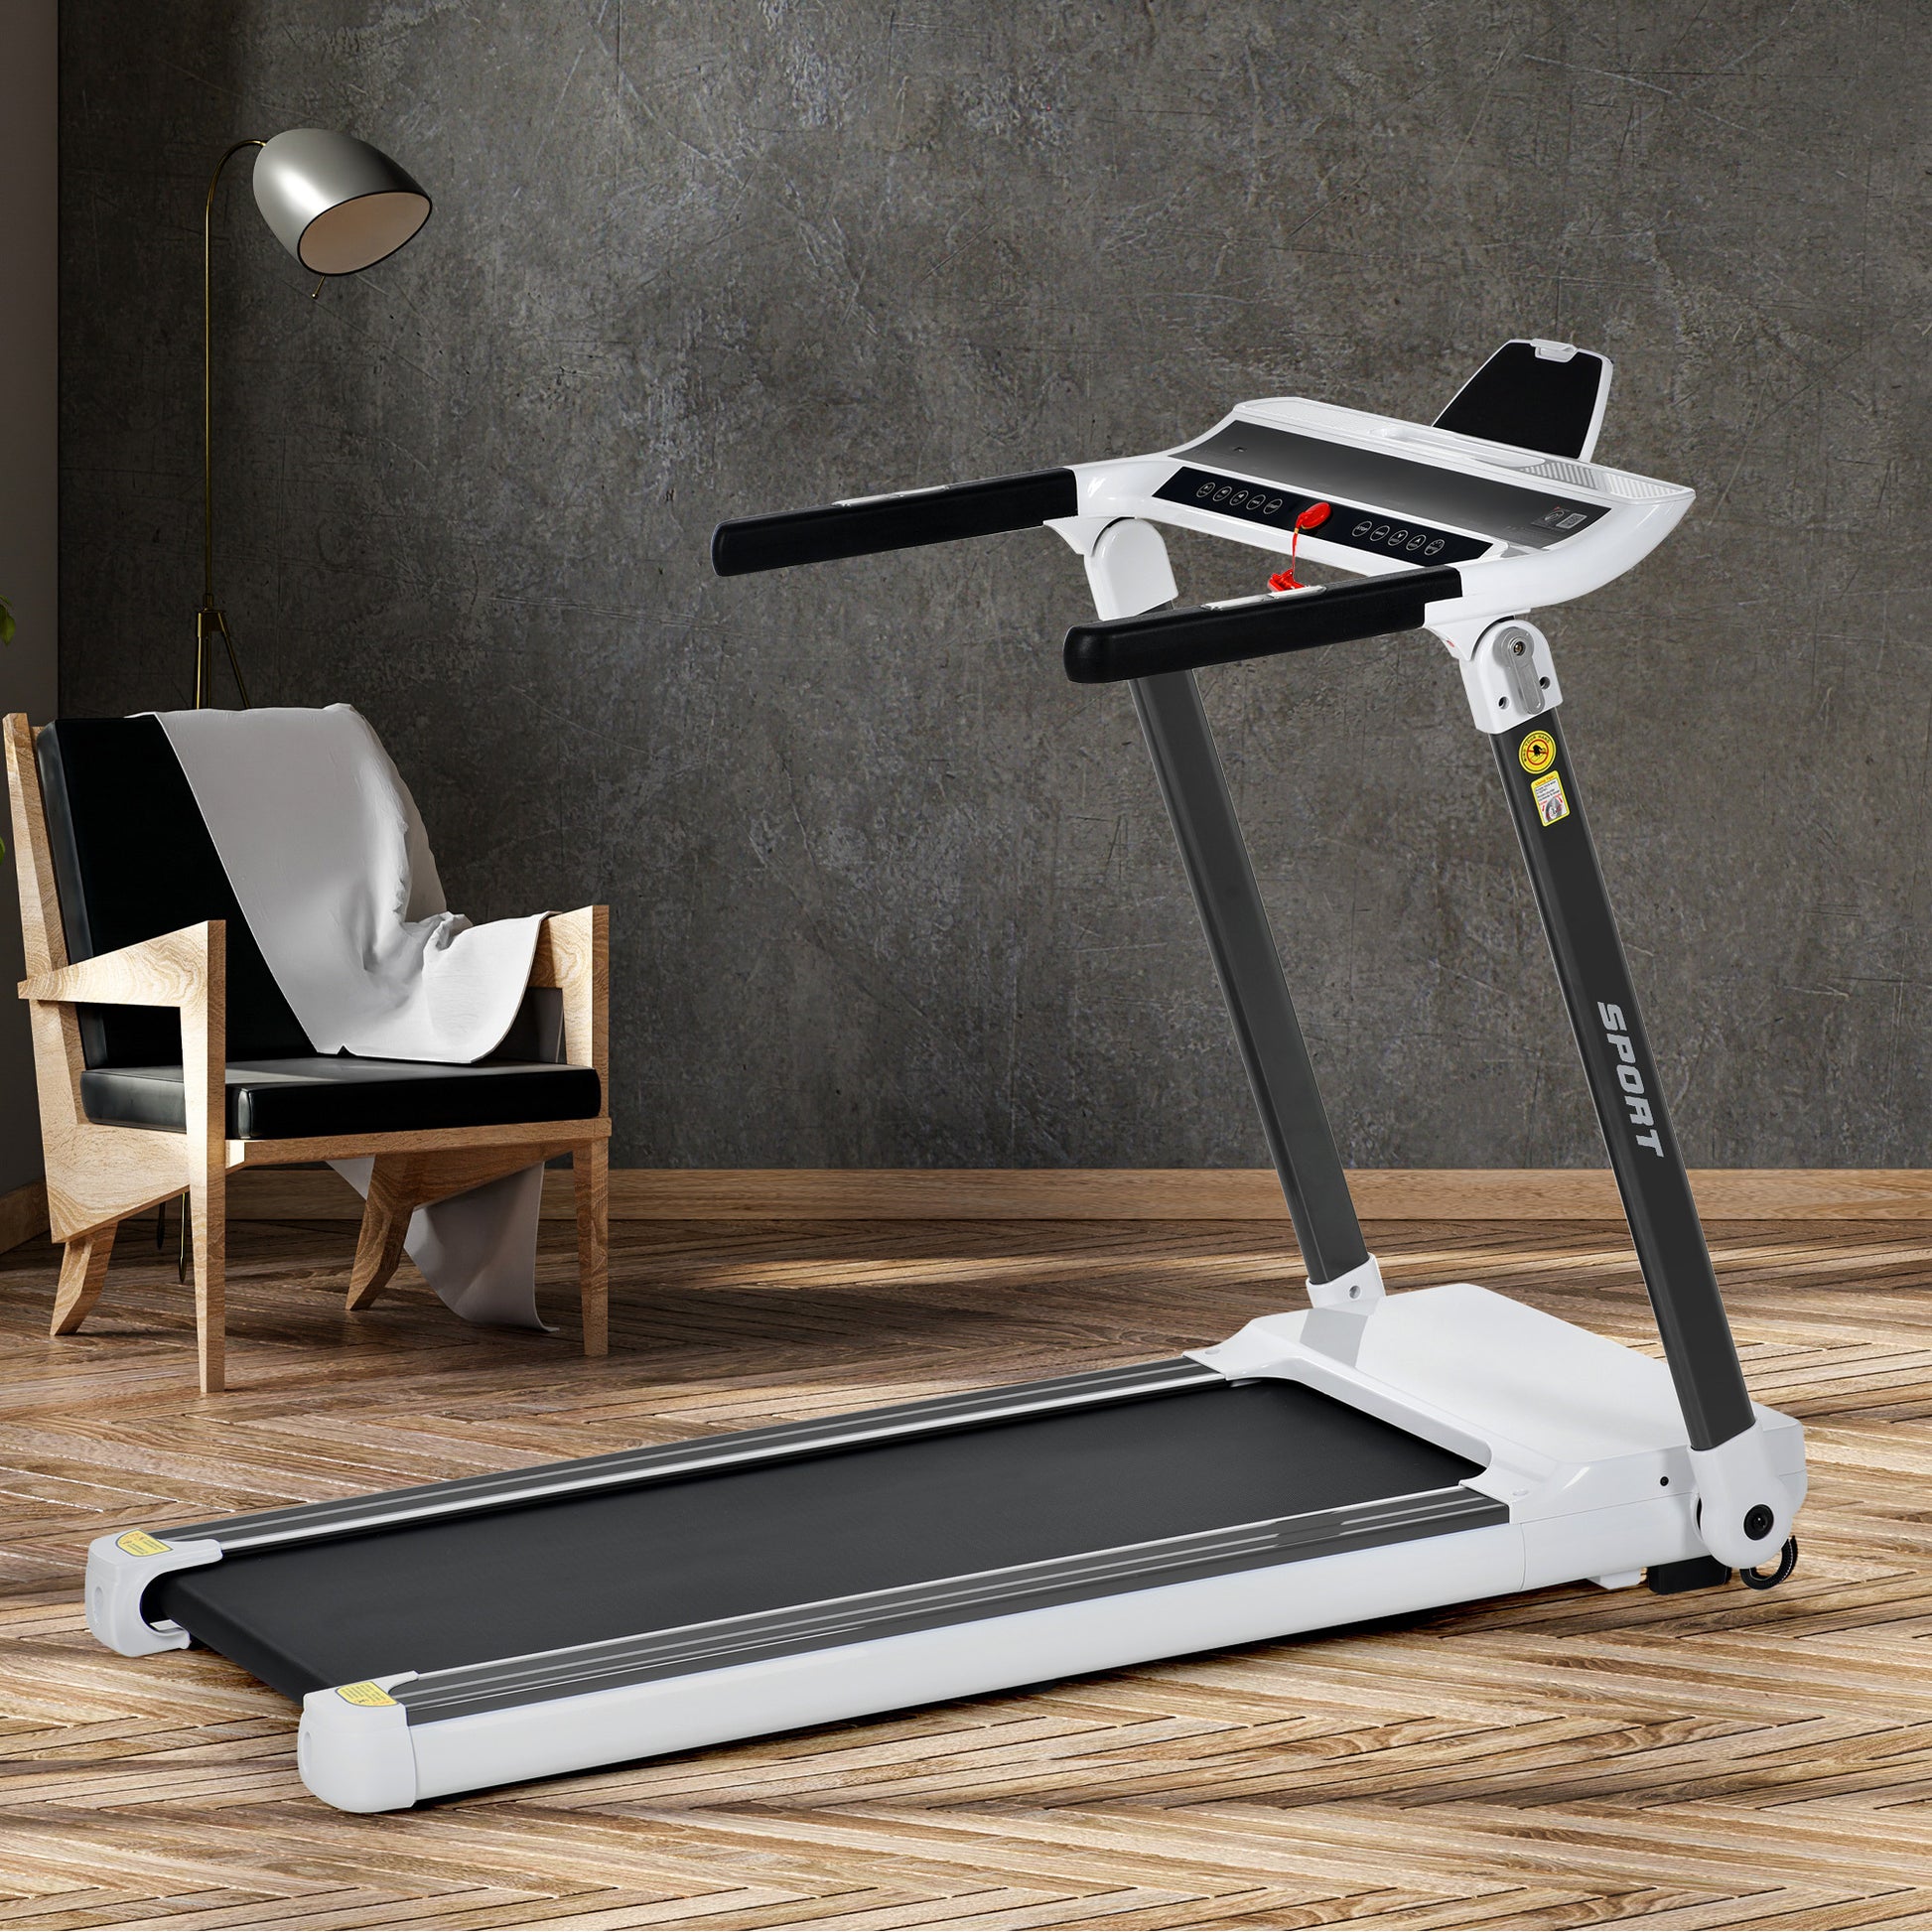 Portable Compact Treadmill;Electric Motorized 3.5HP;14KM/H;Medium Running Machine Motorised Gym 330lbs;Foldable for Home Gym Fitness